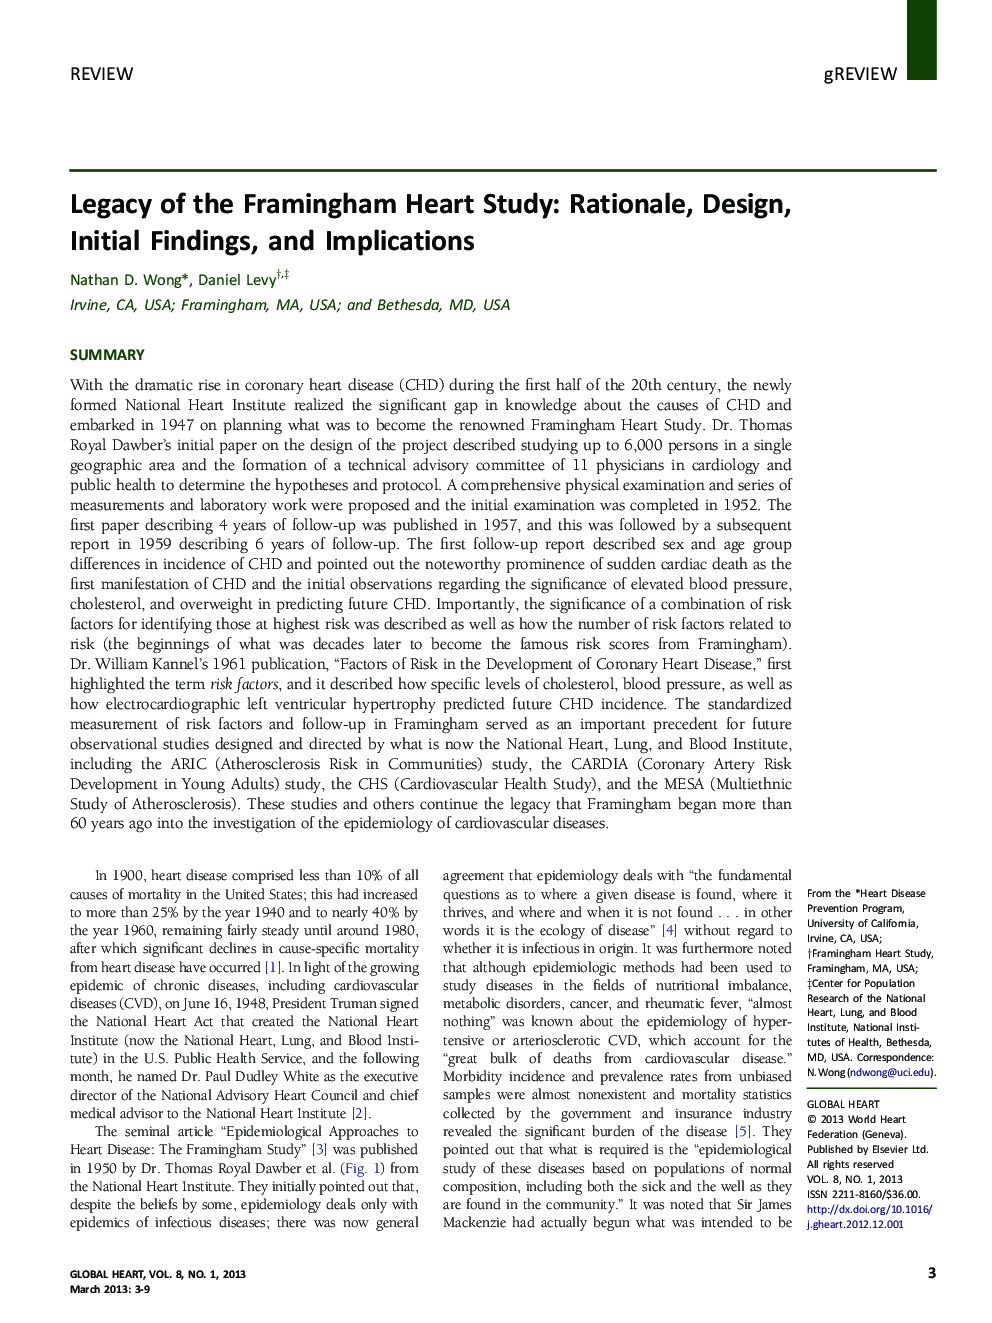 Legacy of the Framingham Heart Study: Rationale, Design, Initial Findings, and Implications